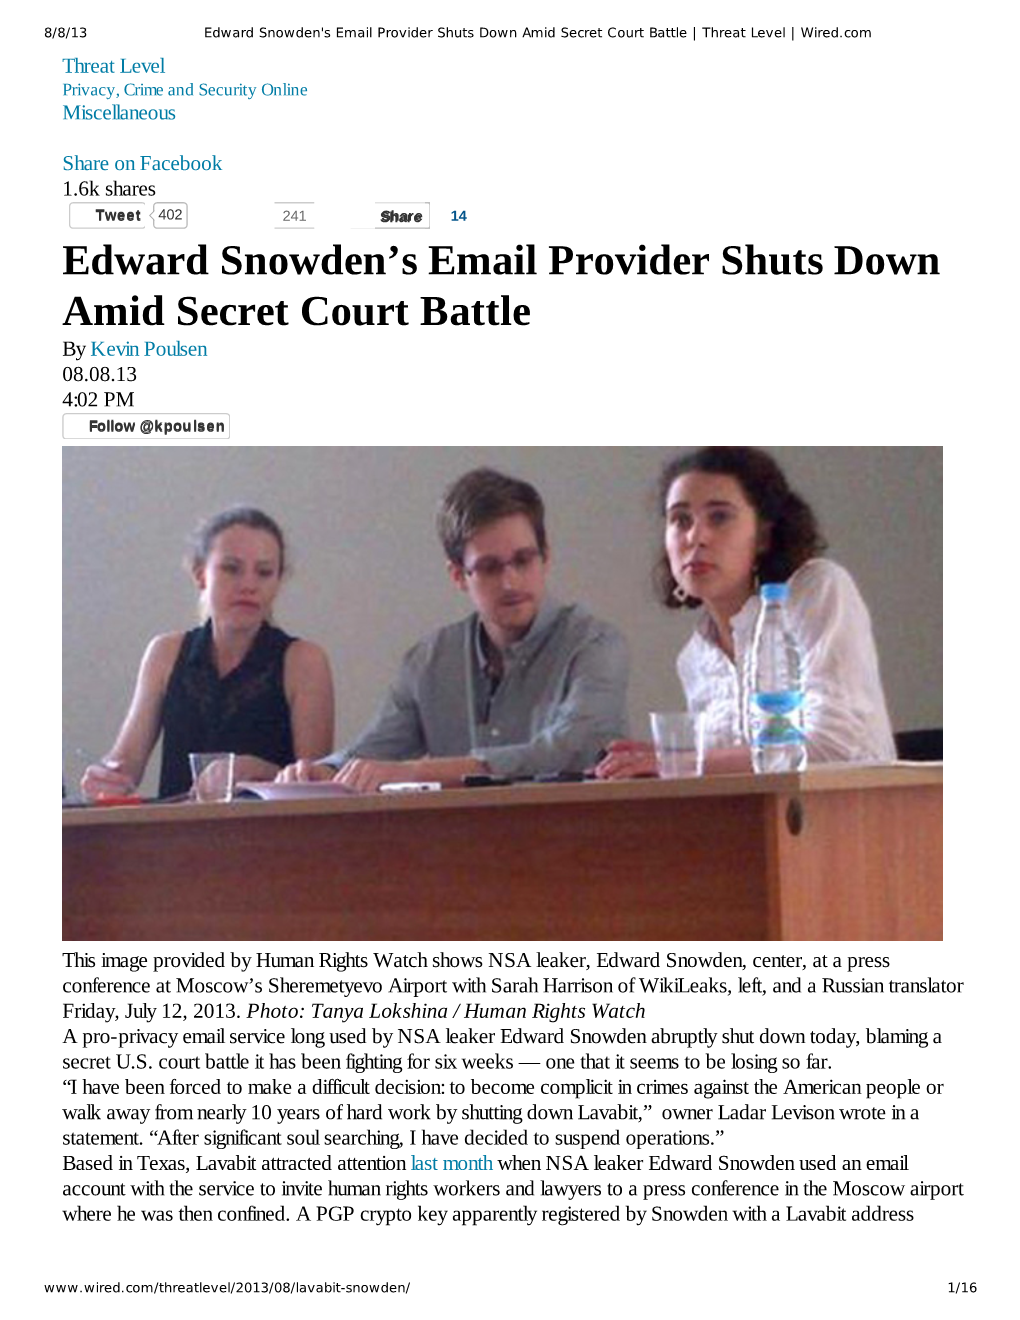 Edward Snowden's Email Provider Shuts Down Amid Secret Court Battle | Threat Level | Wired.Com Threat Level Privacy, Crime and Security Online Miscellaneous